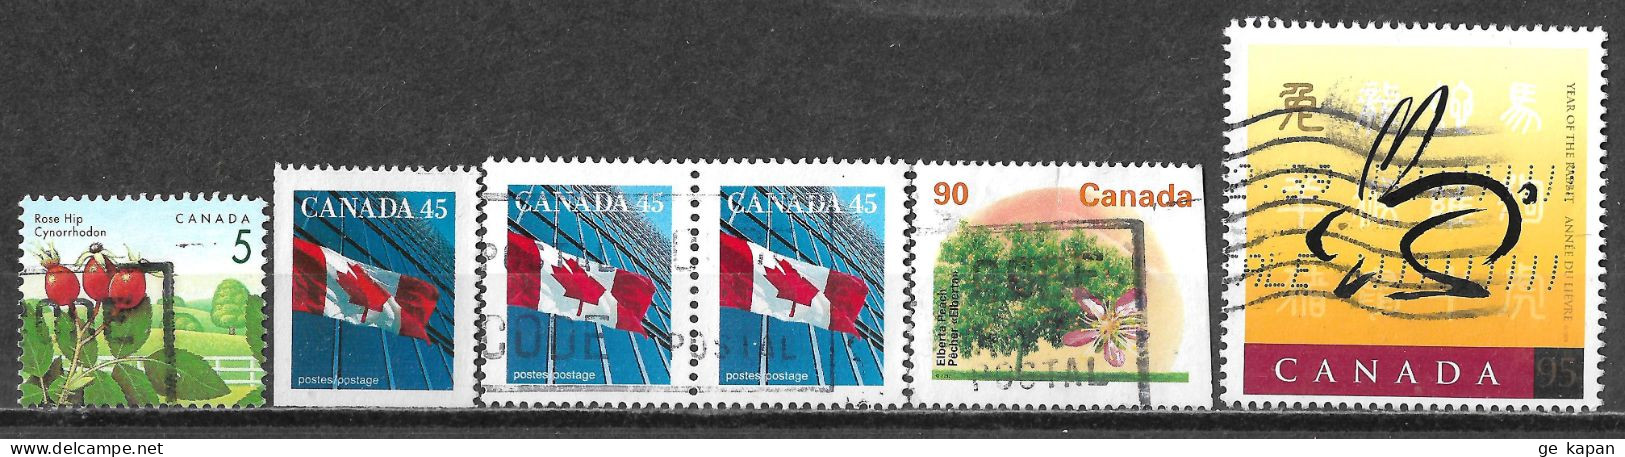 1991,1999 CANADA Set Of 6 USED Stamps (Scott # 1352,1361,1374,1768) CV $3.50 - Used Stamps